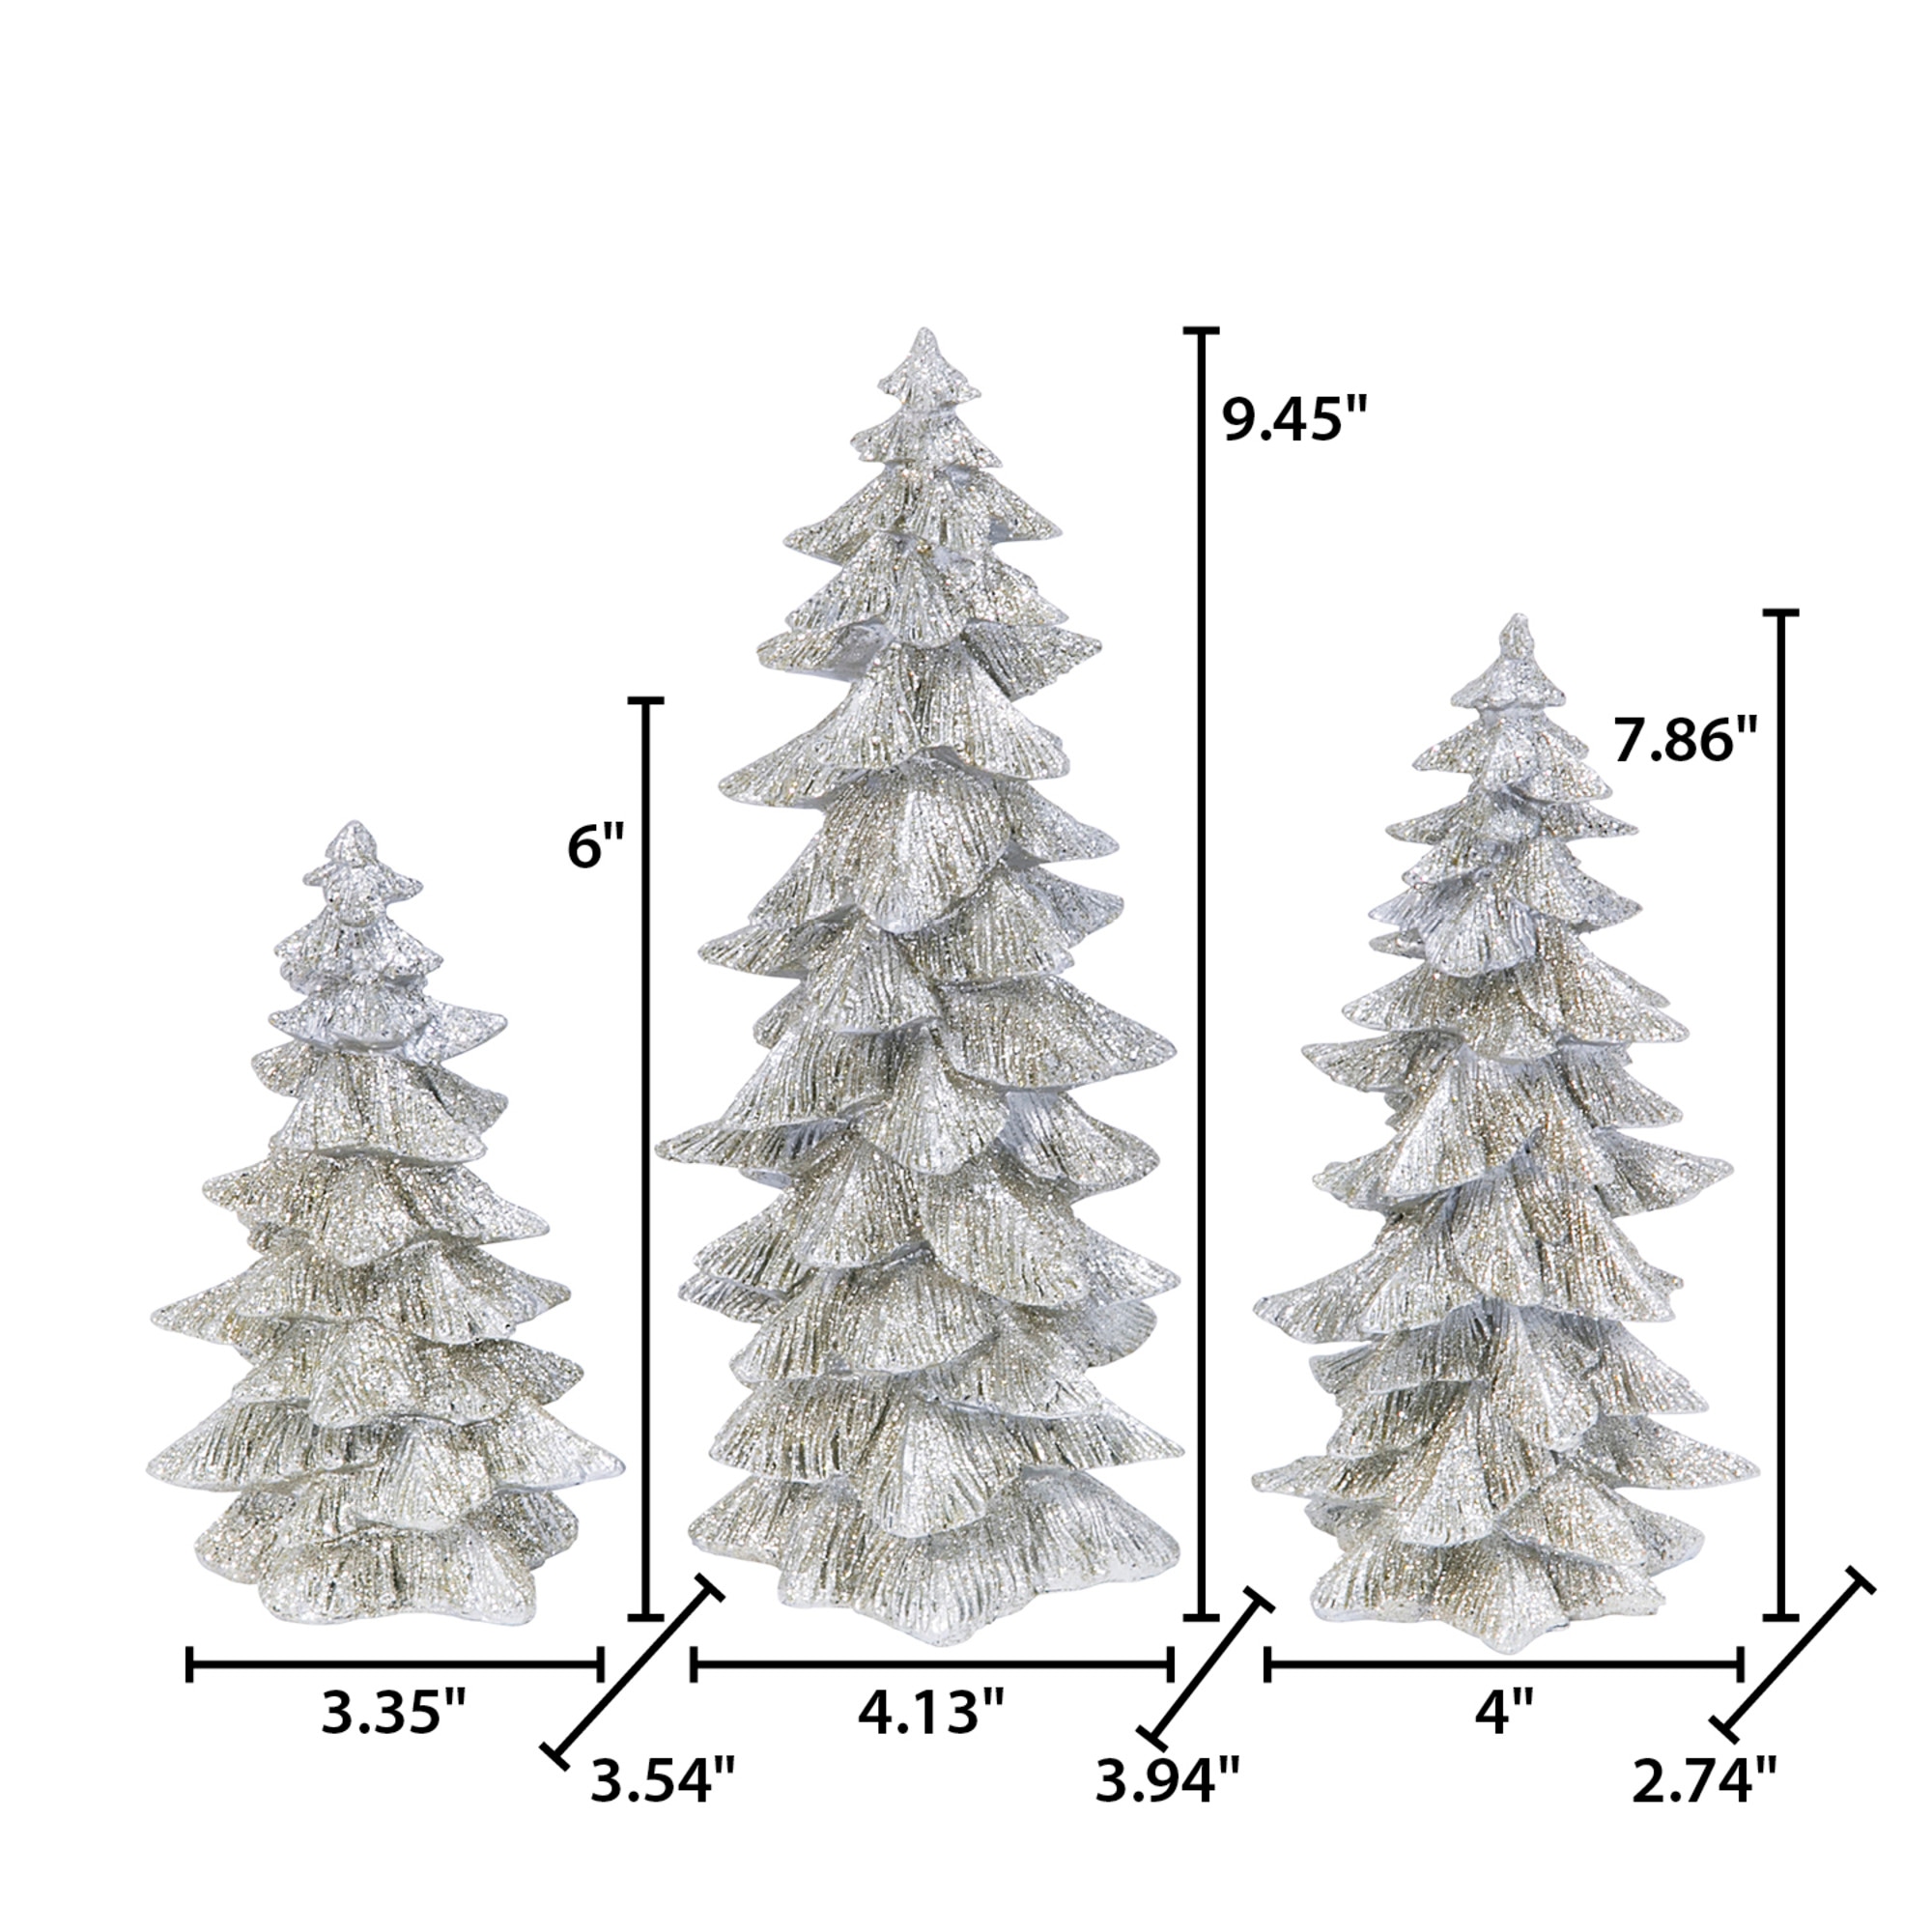 Giegxin Christmas Tree Decorations Include 12 x 34 Inch Large